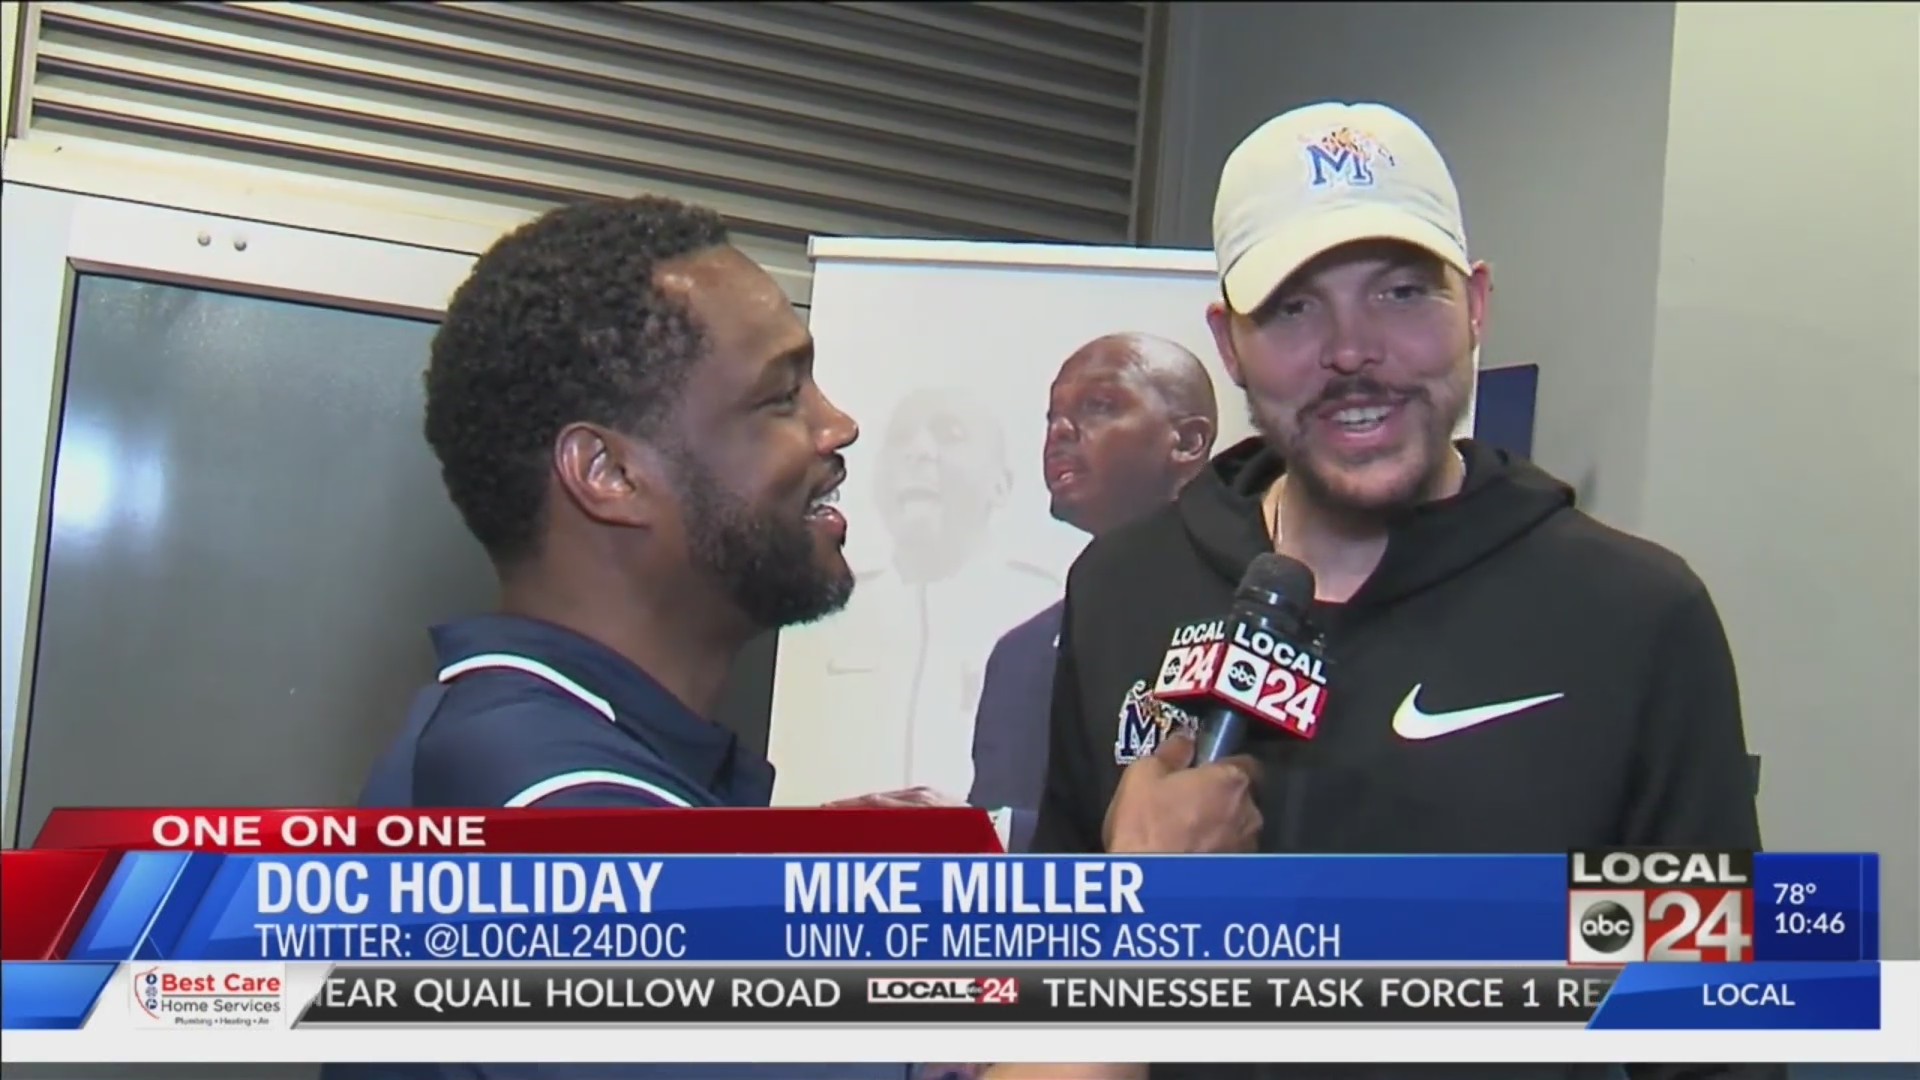 Sports Director Doc Holliday goes one on one with NBA champ and U of M Assistant Coach Mike Miller